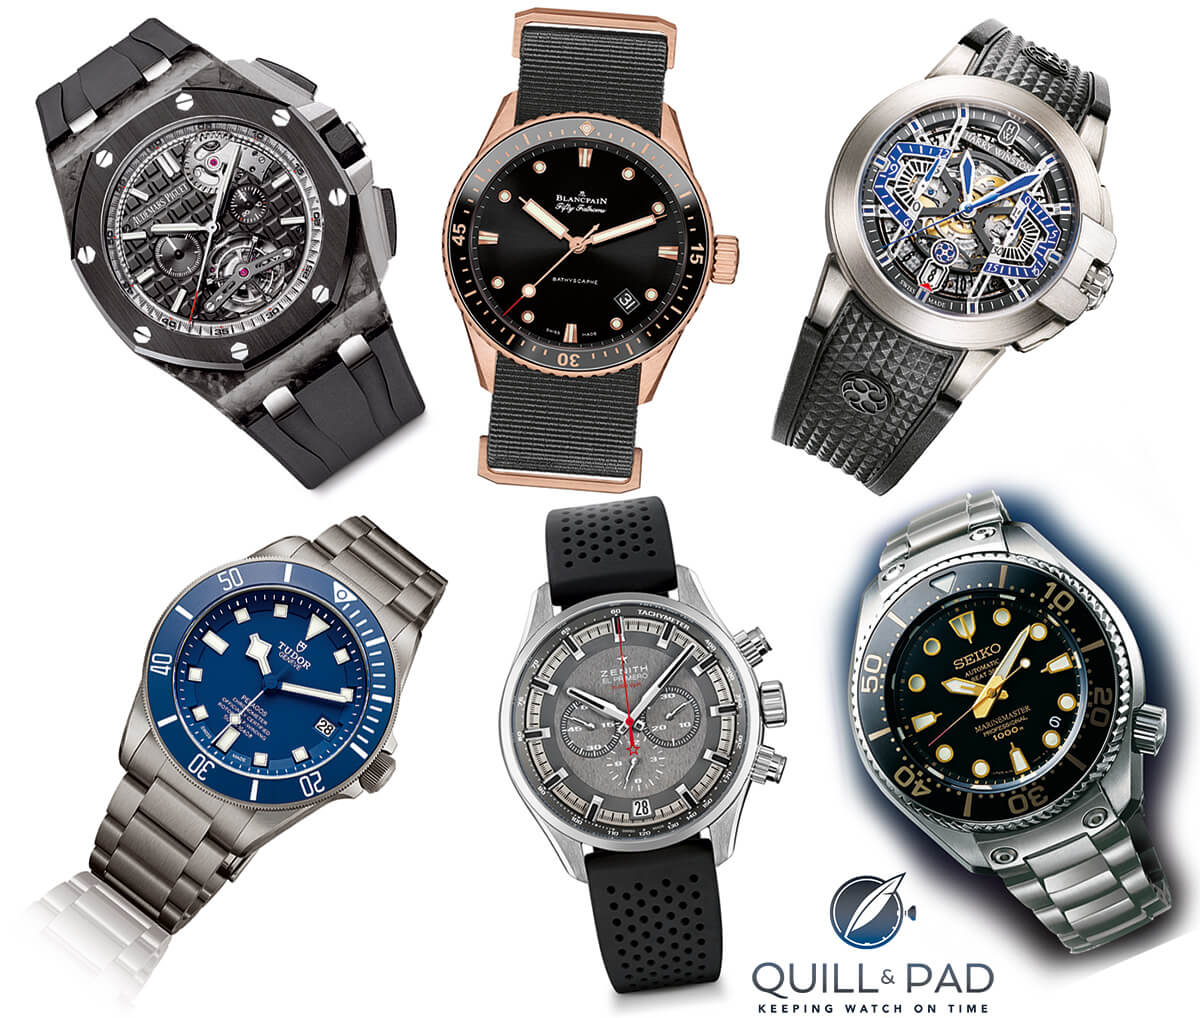 Sports watches pre-selected for the 2015 GPHG are shown clockwise from top left: Royal Oak Offshore Selfwinding Tourbillon Chronograph, Blancpain Fifty Fathoms Bathyscaphe, Harry Winston Project Z9, Seiko Prospex Marinemaster Professional Diver's 1000m Hi-Beat 36000, Zenith El Primero Sport, and Tudor Pelagos